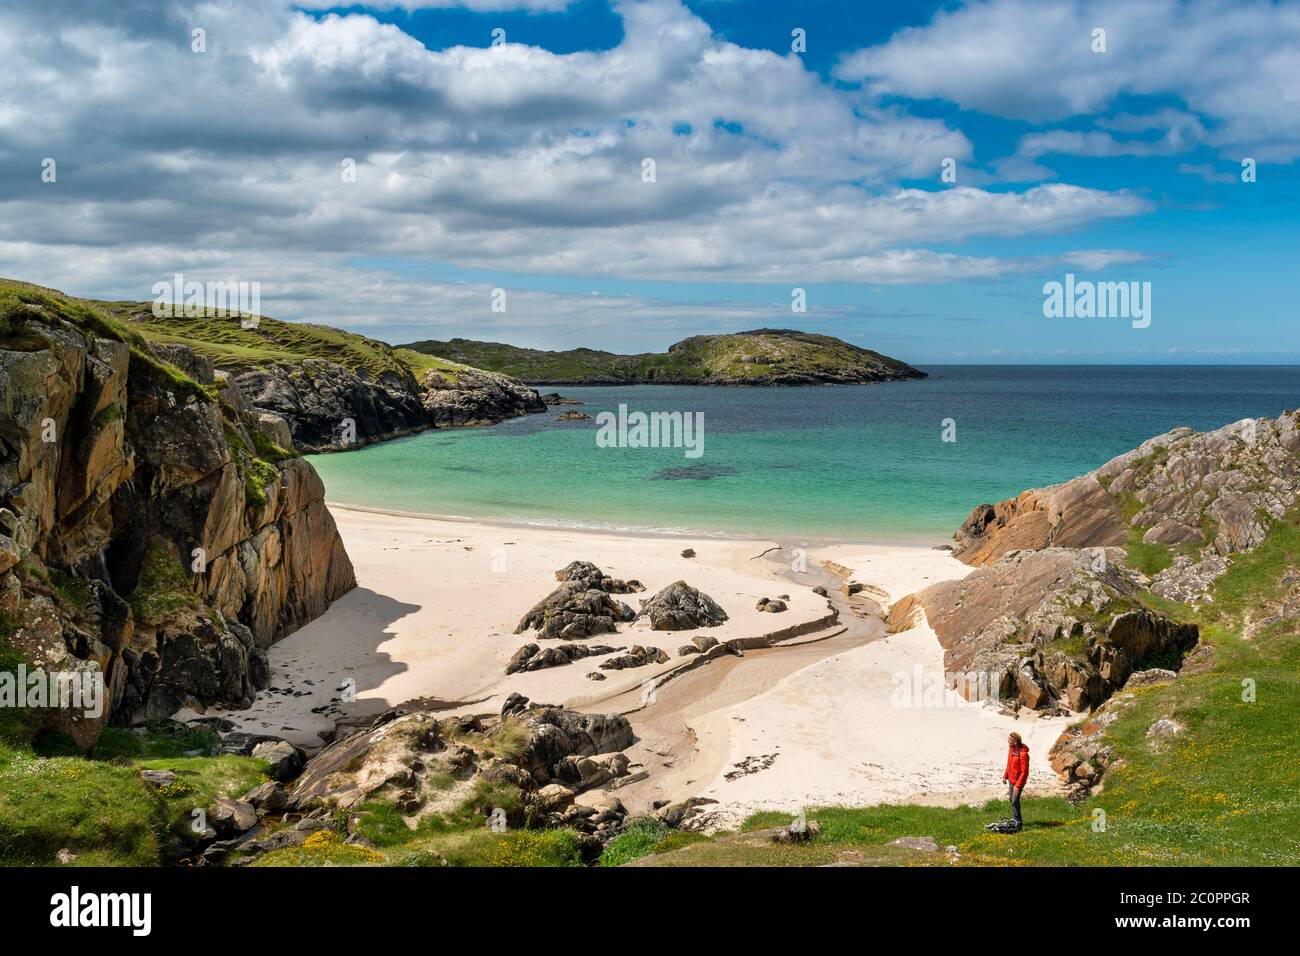 ACHMELVICH BAY AND BEACH SUTHERLAND HIGHLANDS SCOTLAND BLUE  SKY WITH CLOUDS THE MANY COLOURS OF THE SEA AND A LONE HIKER Stock Photo